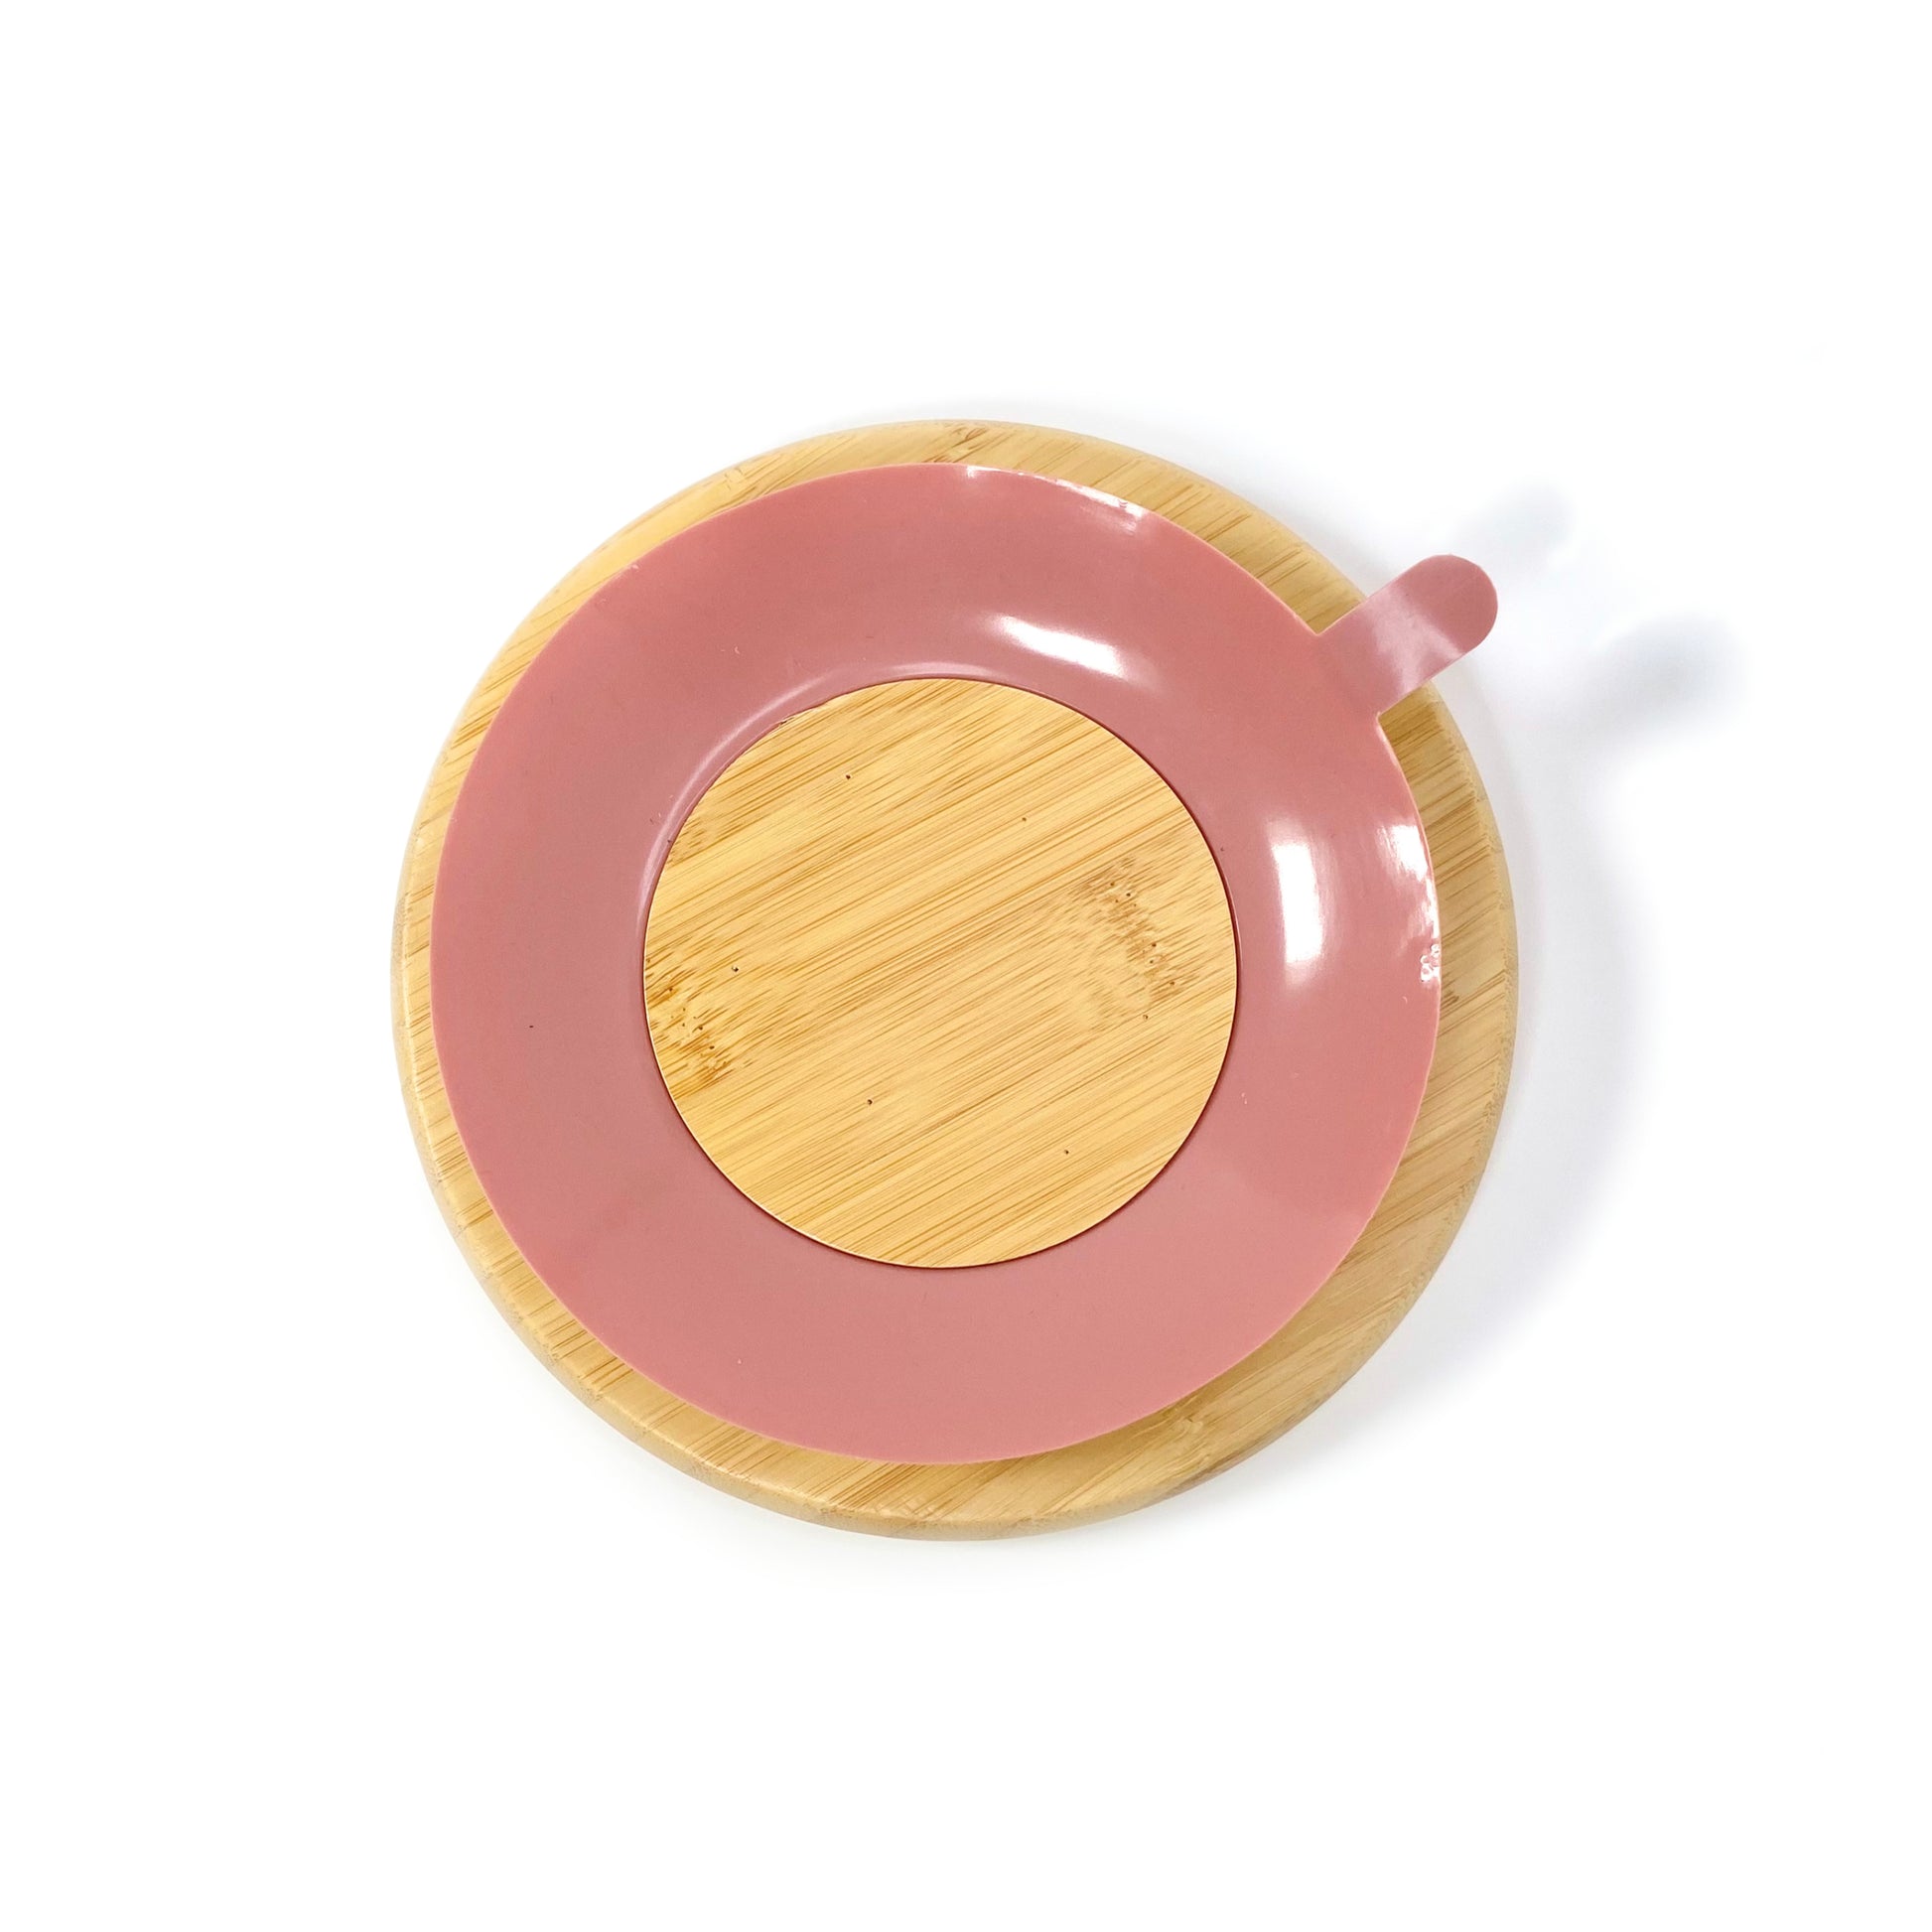 A children’s bamboo section plate with blush pink silicone suction ring on the base. Back view, featuring the blush pink silicone suction ring.